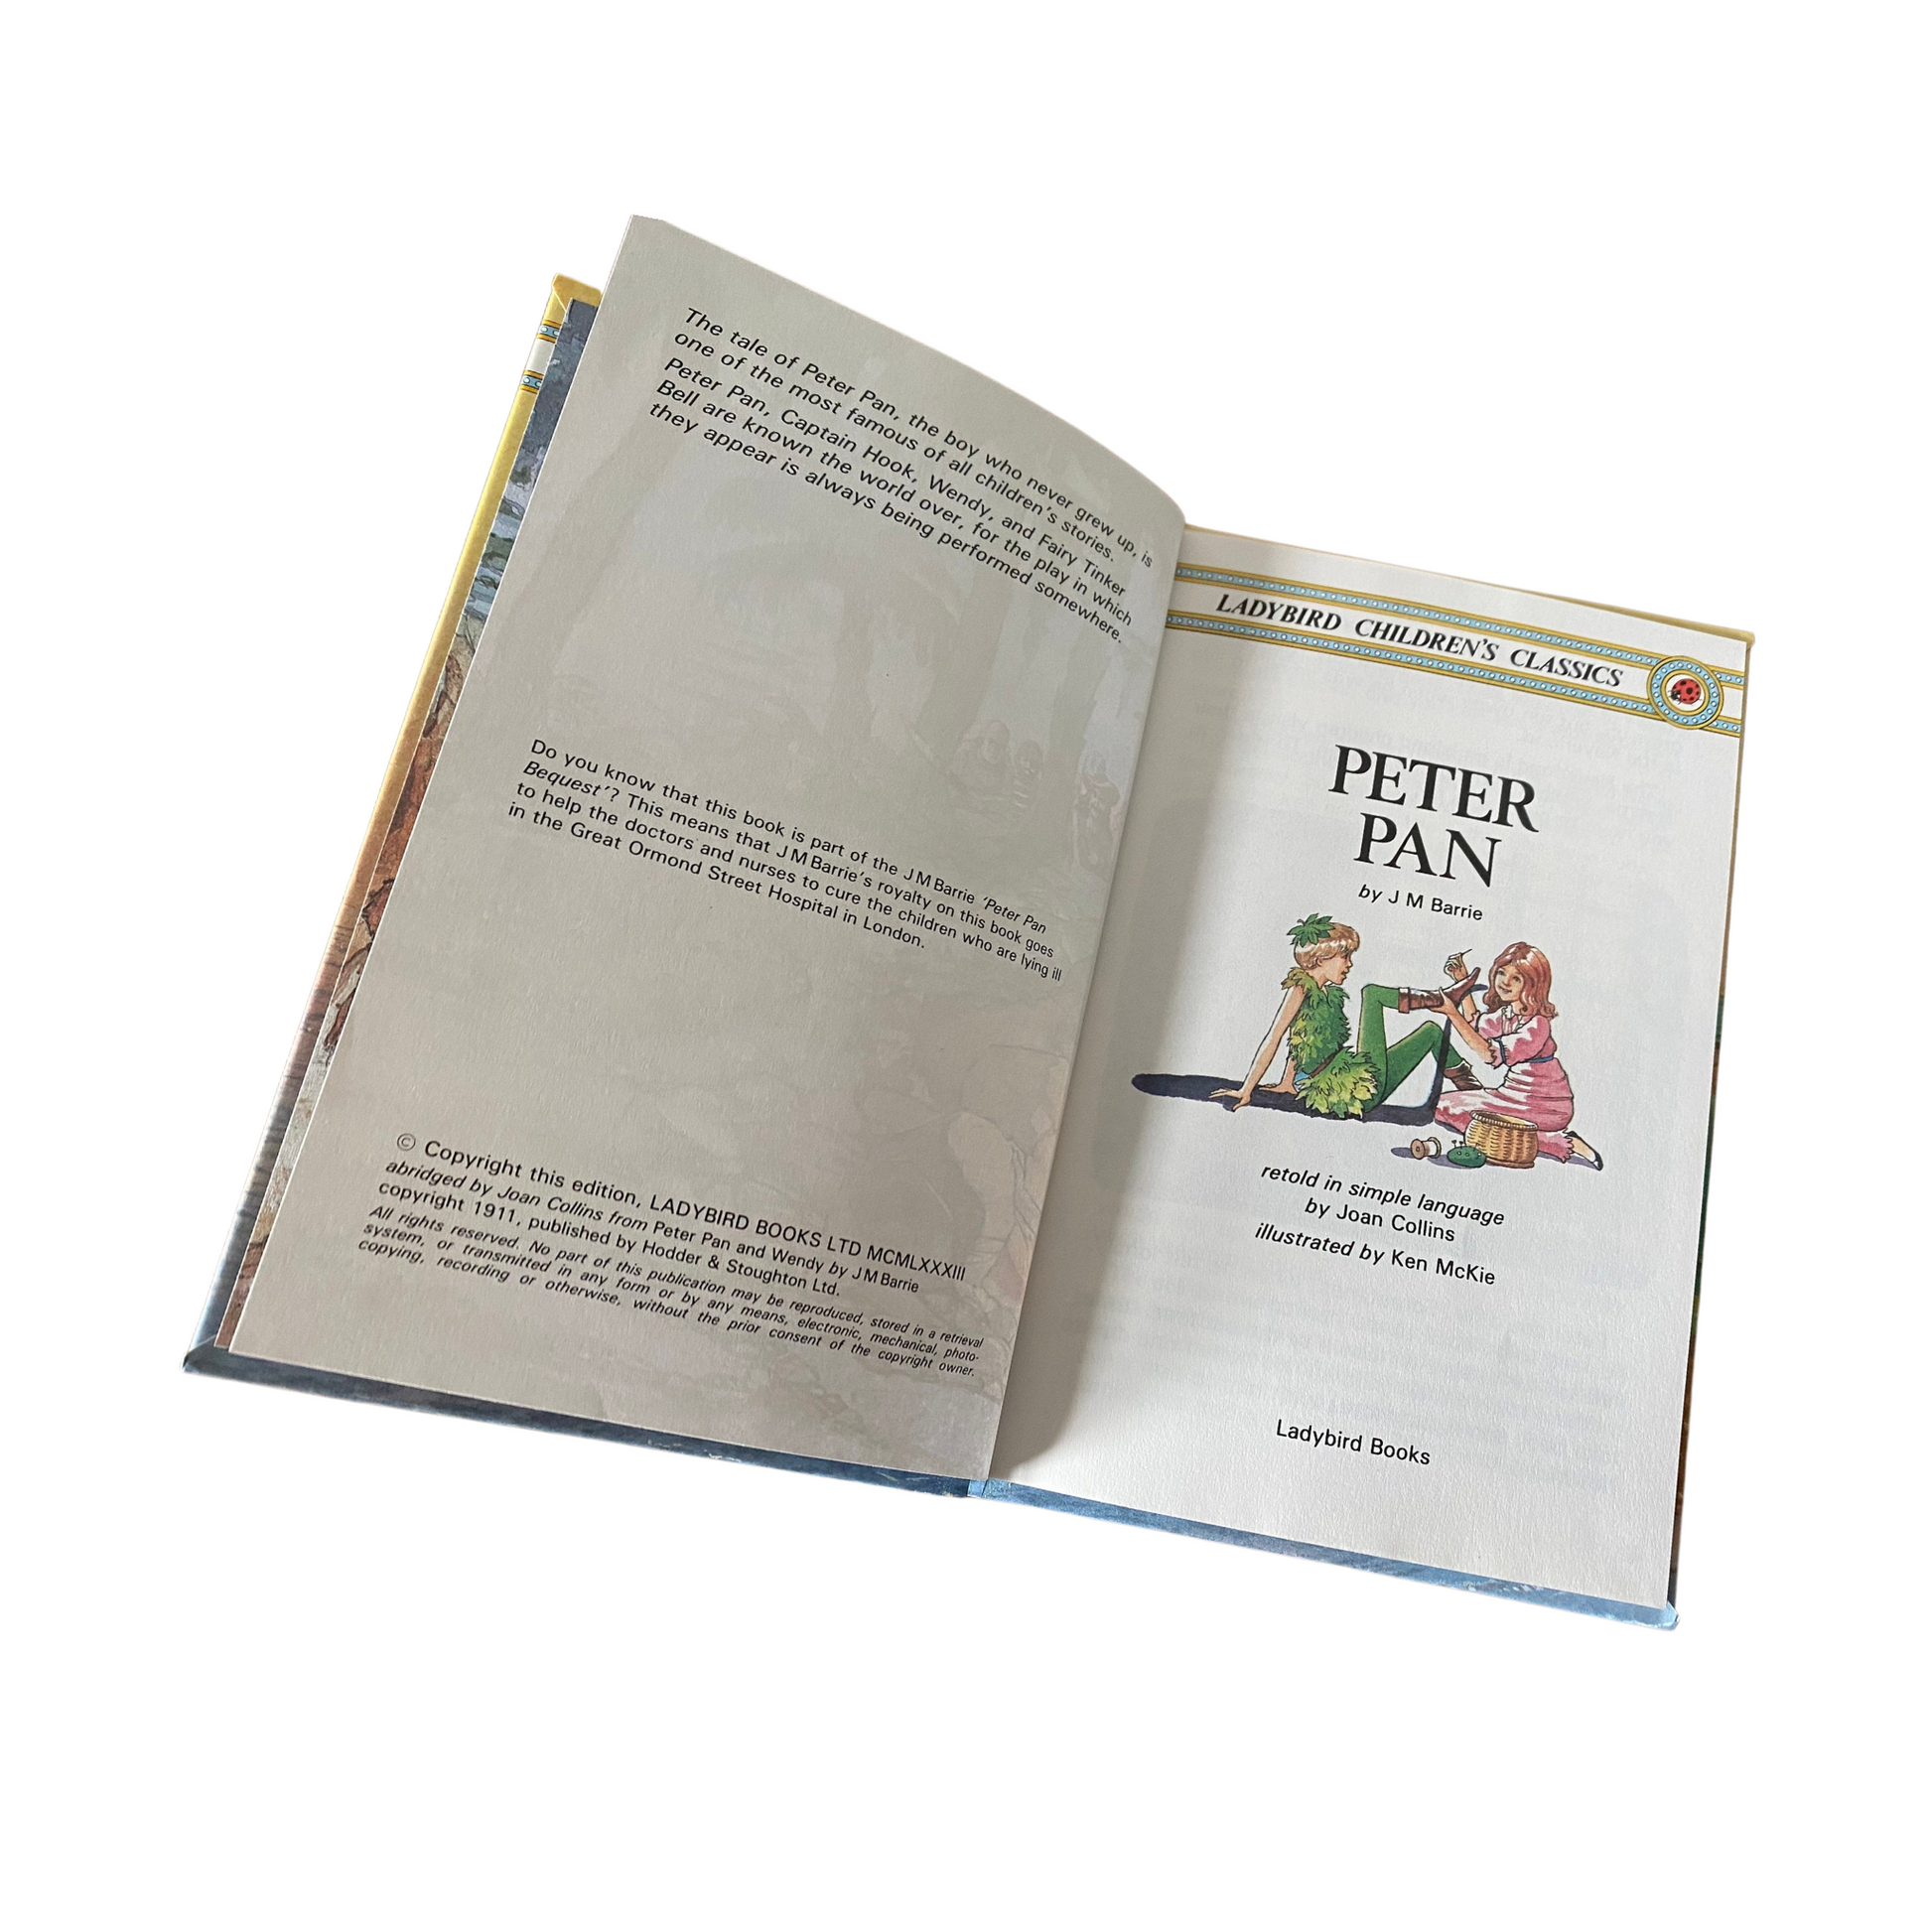 Small hardback book -  Peter Pan by JM Barrie  , perfect for collectors and nostalgic gifts